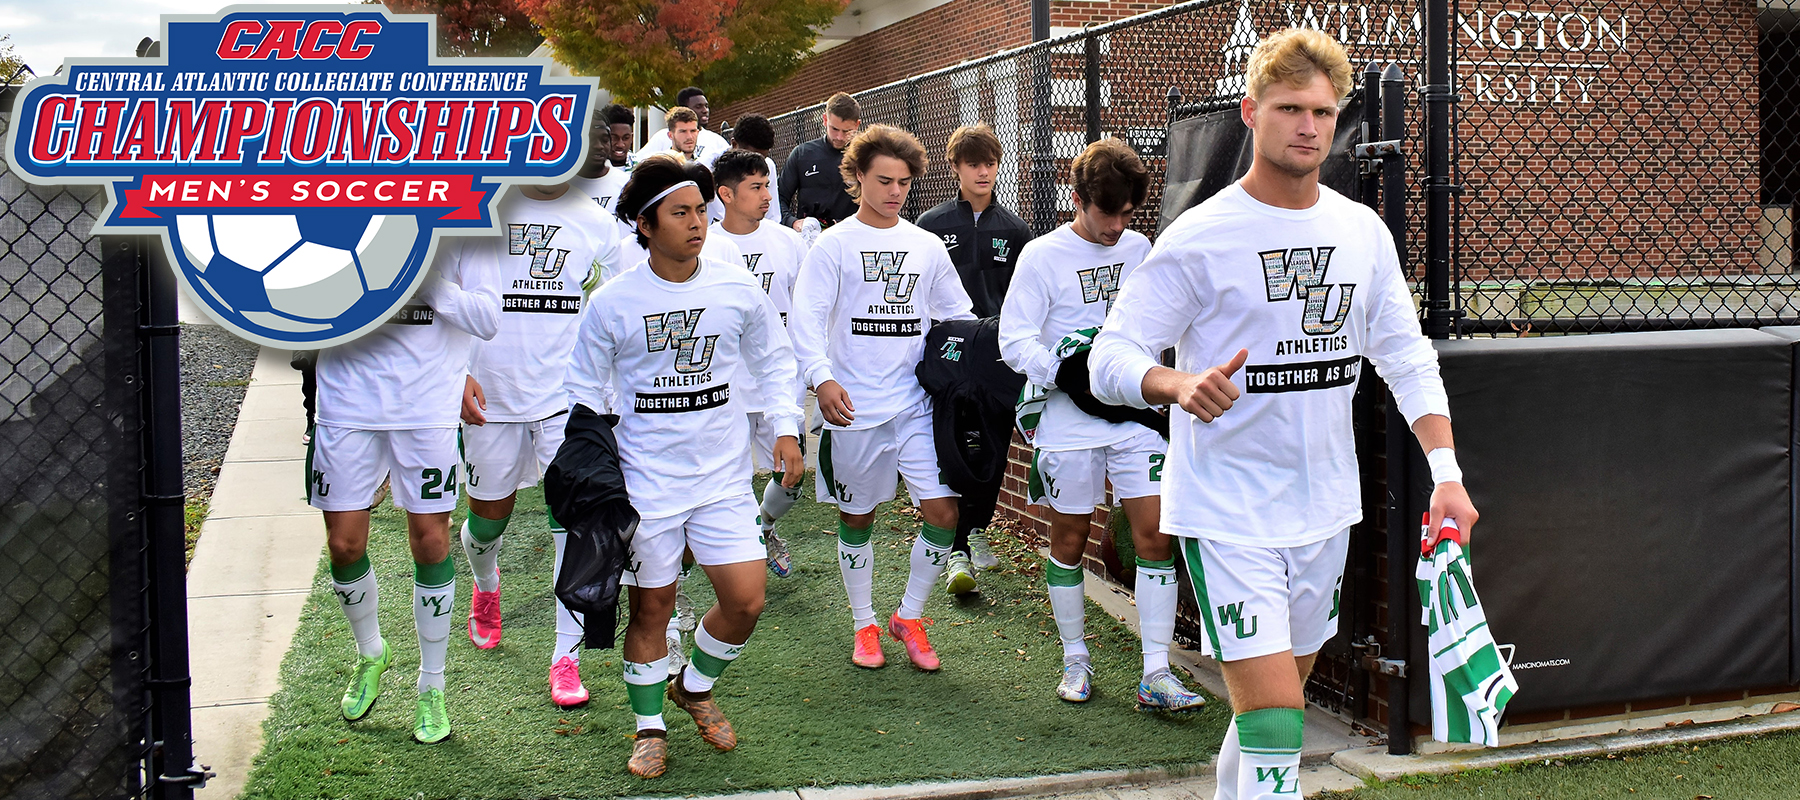 PLAYOFF PREVIEW: No. 2 Seed Men’s Soccer Seeks First CACC Tournament Championship Since 2007